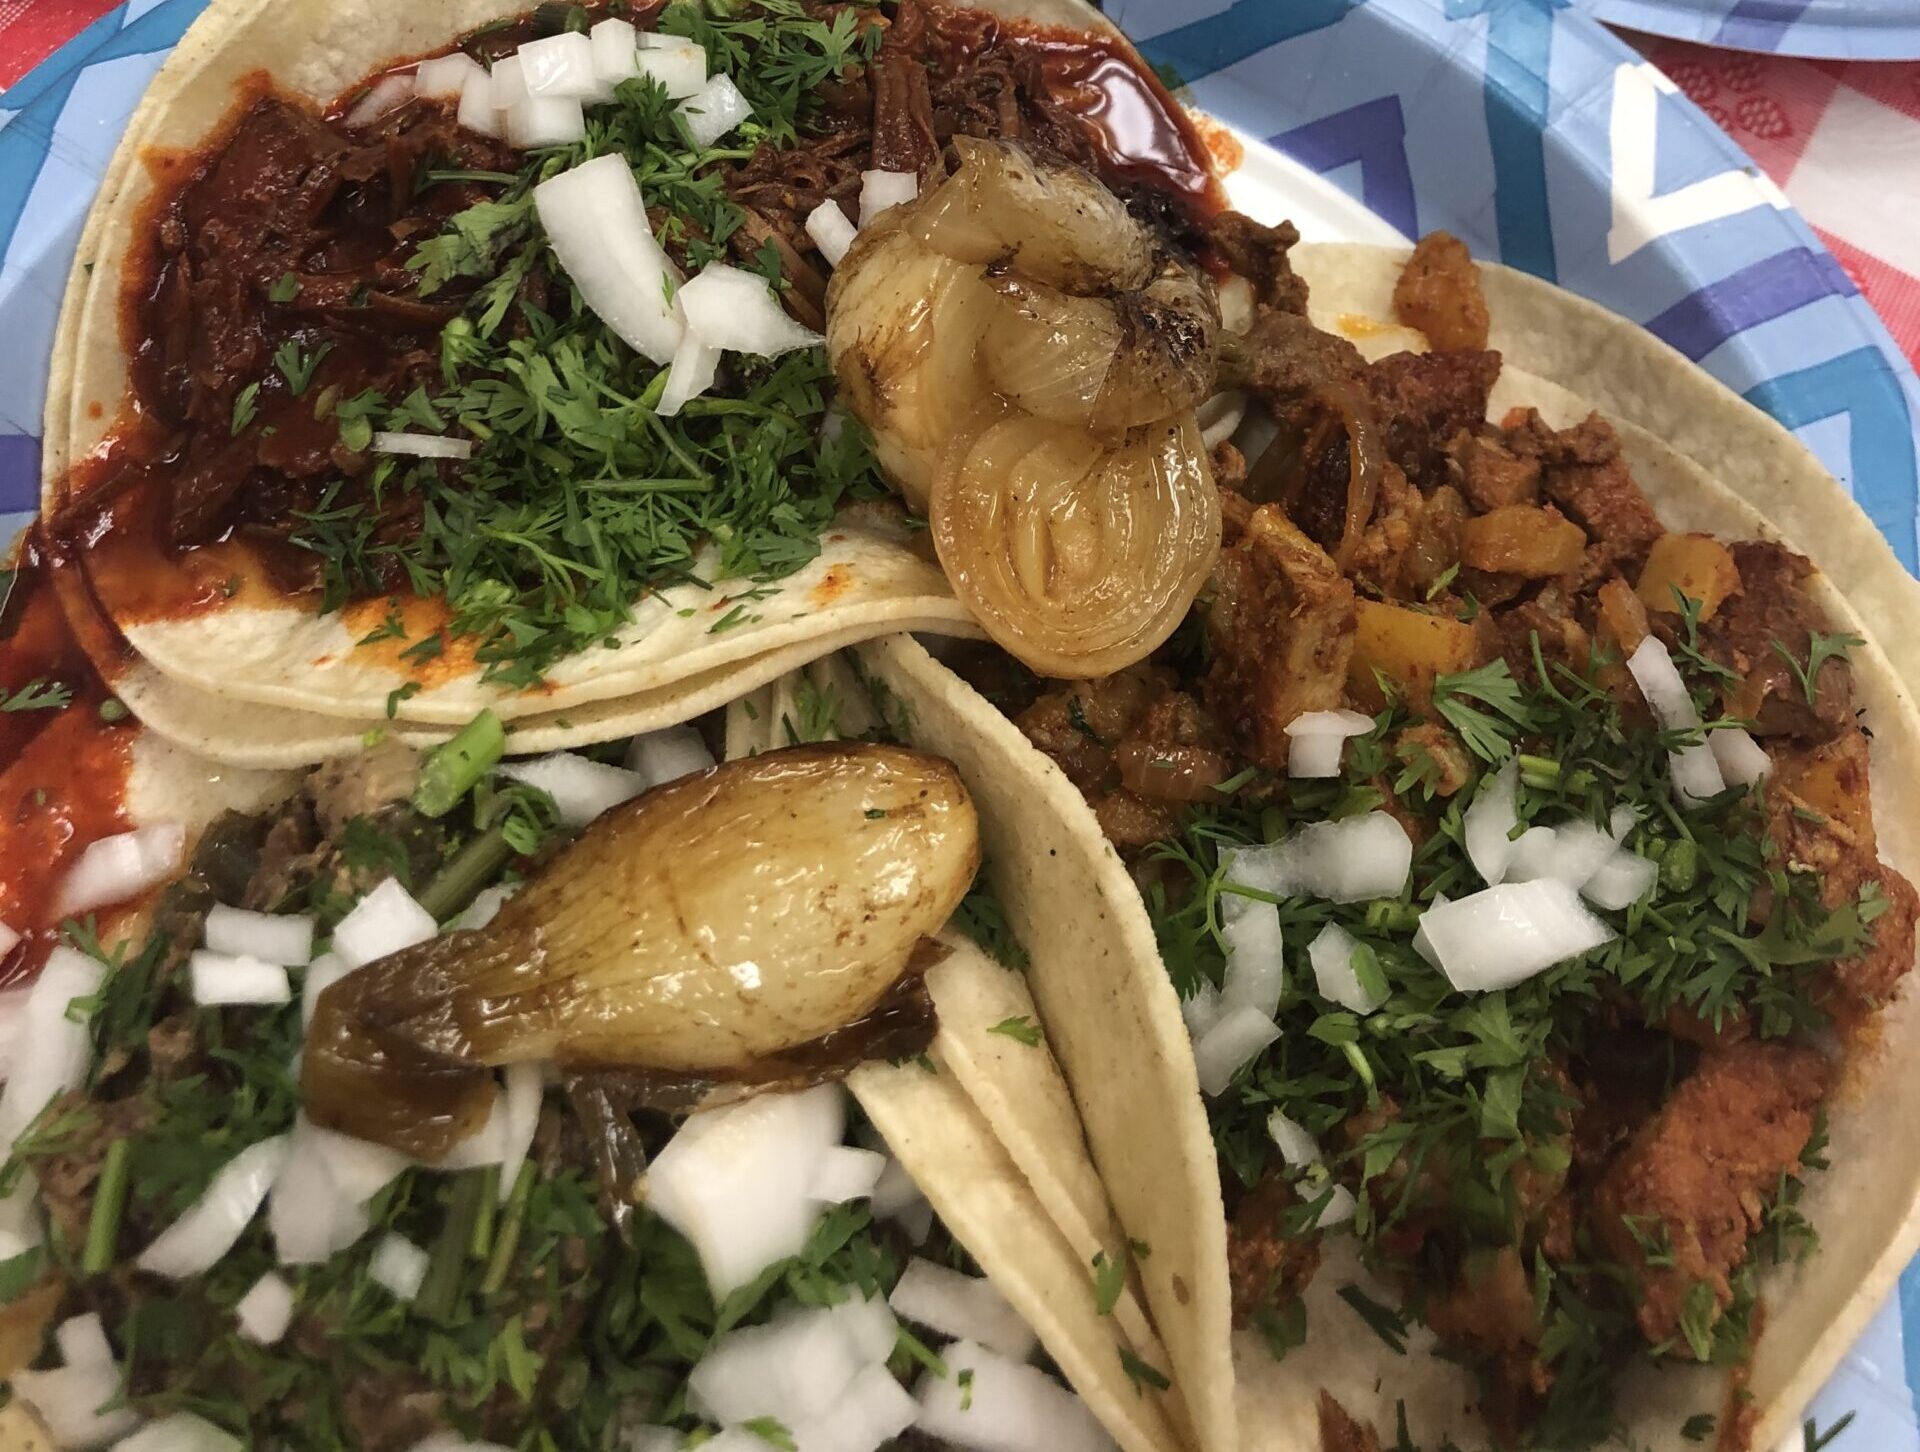 Fresh tacos from Crus-Z Family Corp in Jackson Heights, Queens